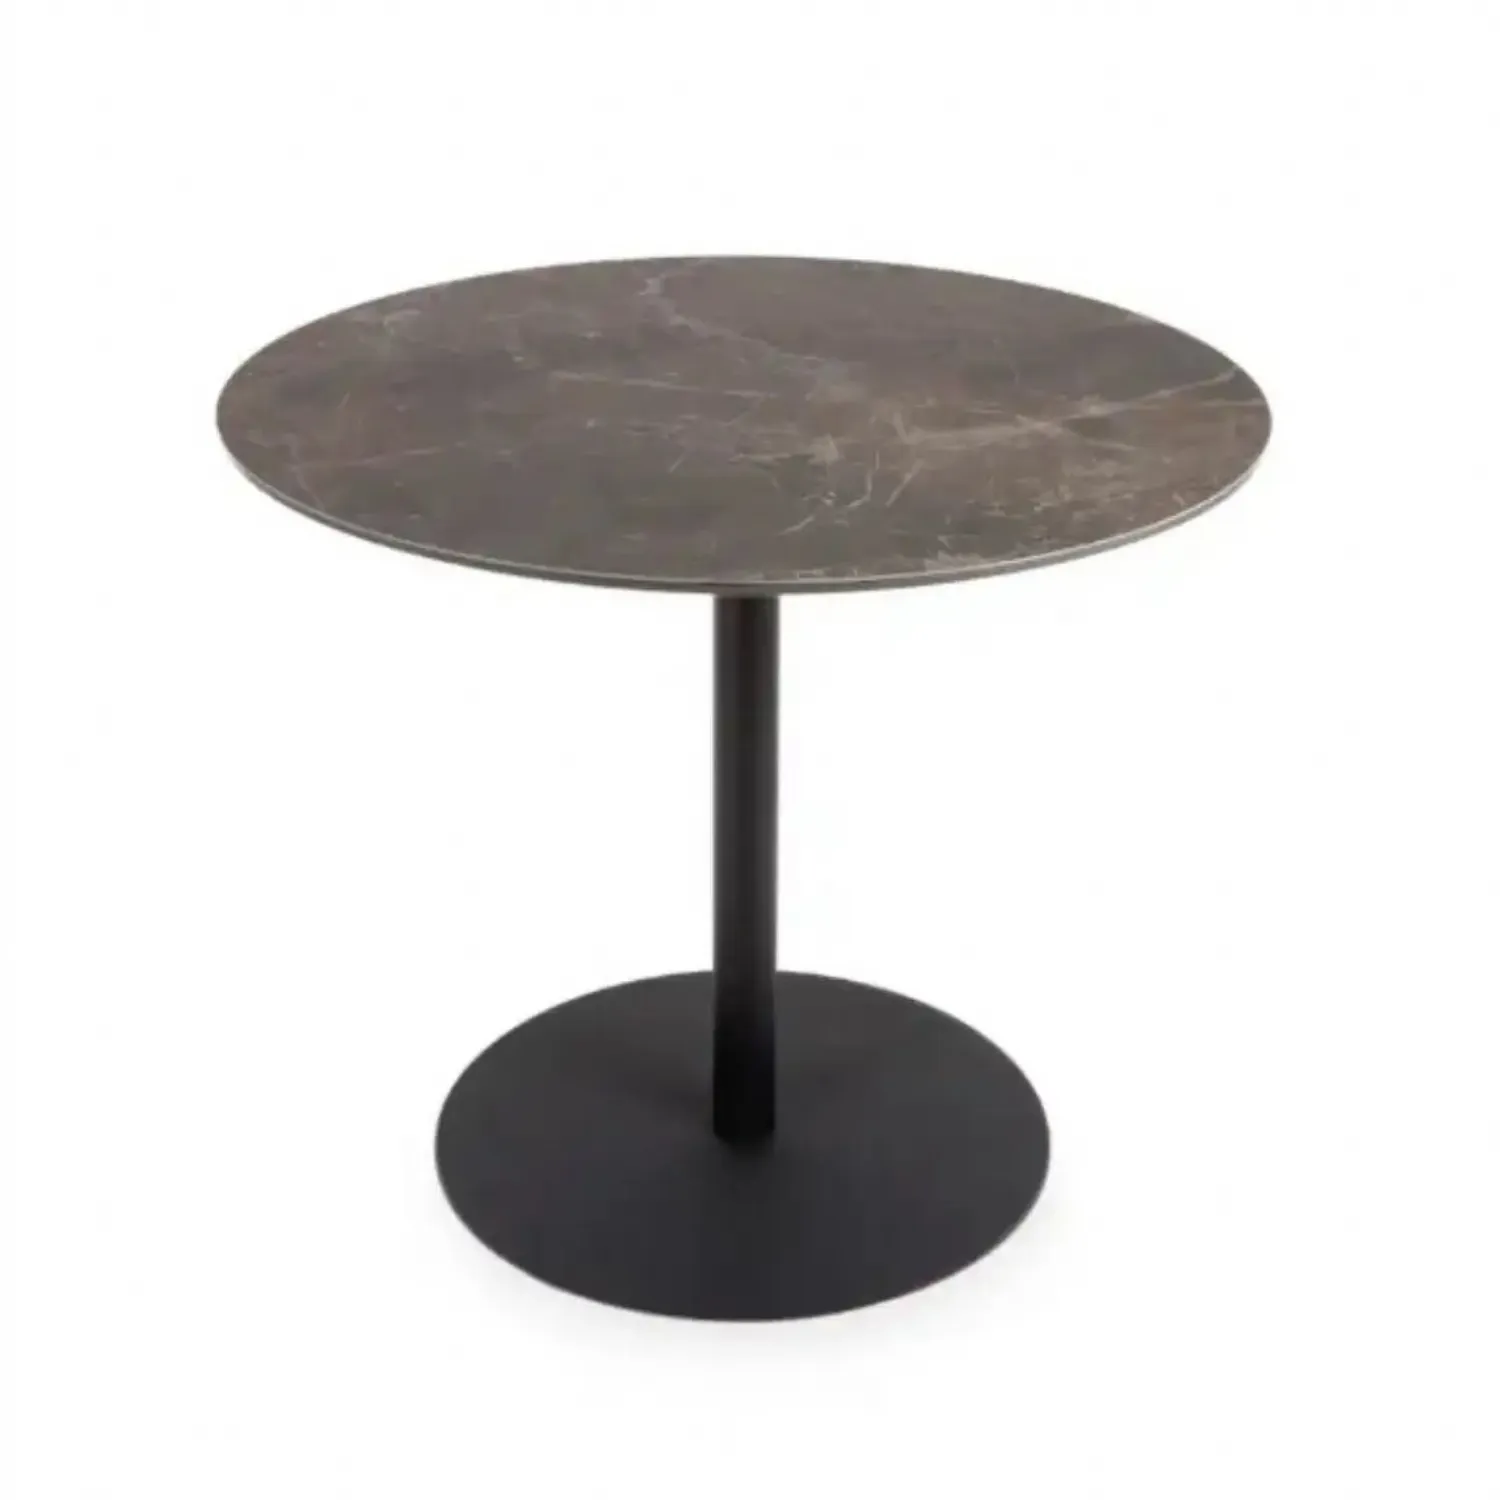 Sintered Stone 90cm Round Dining Table